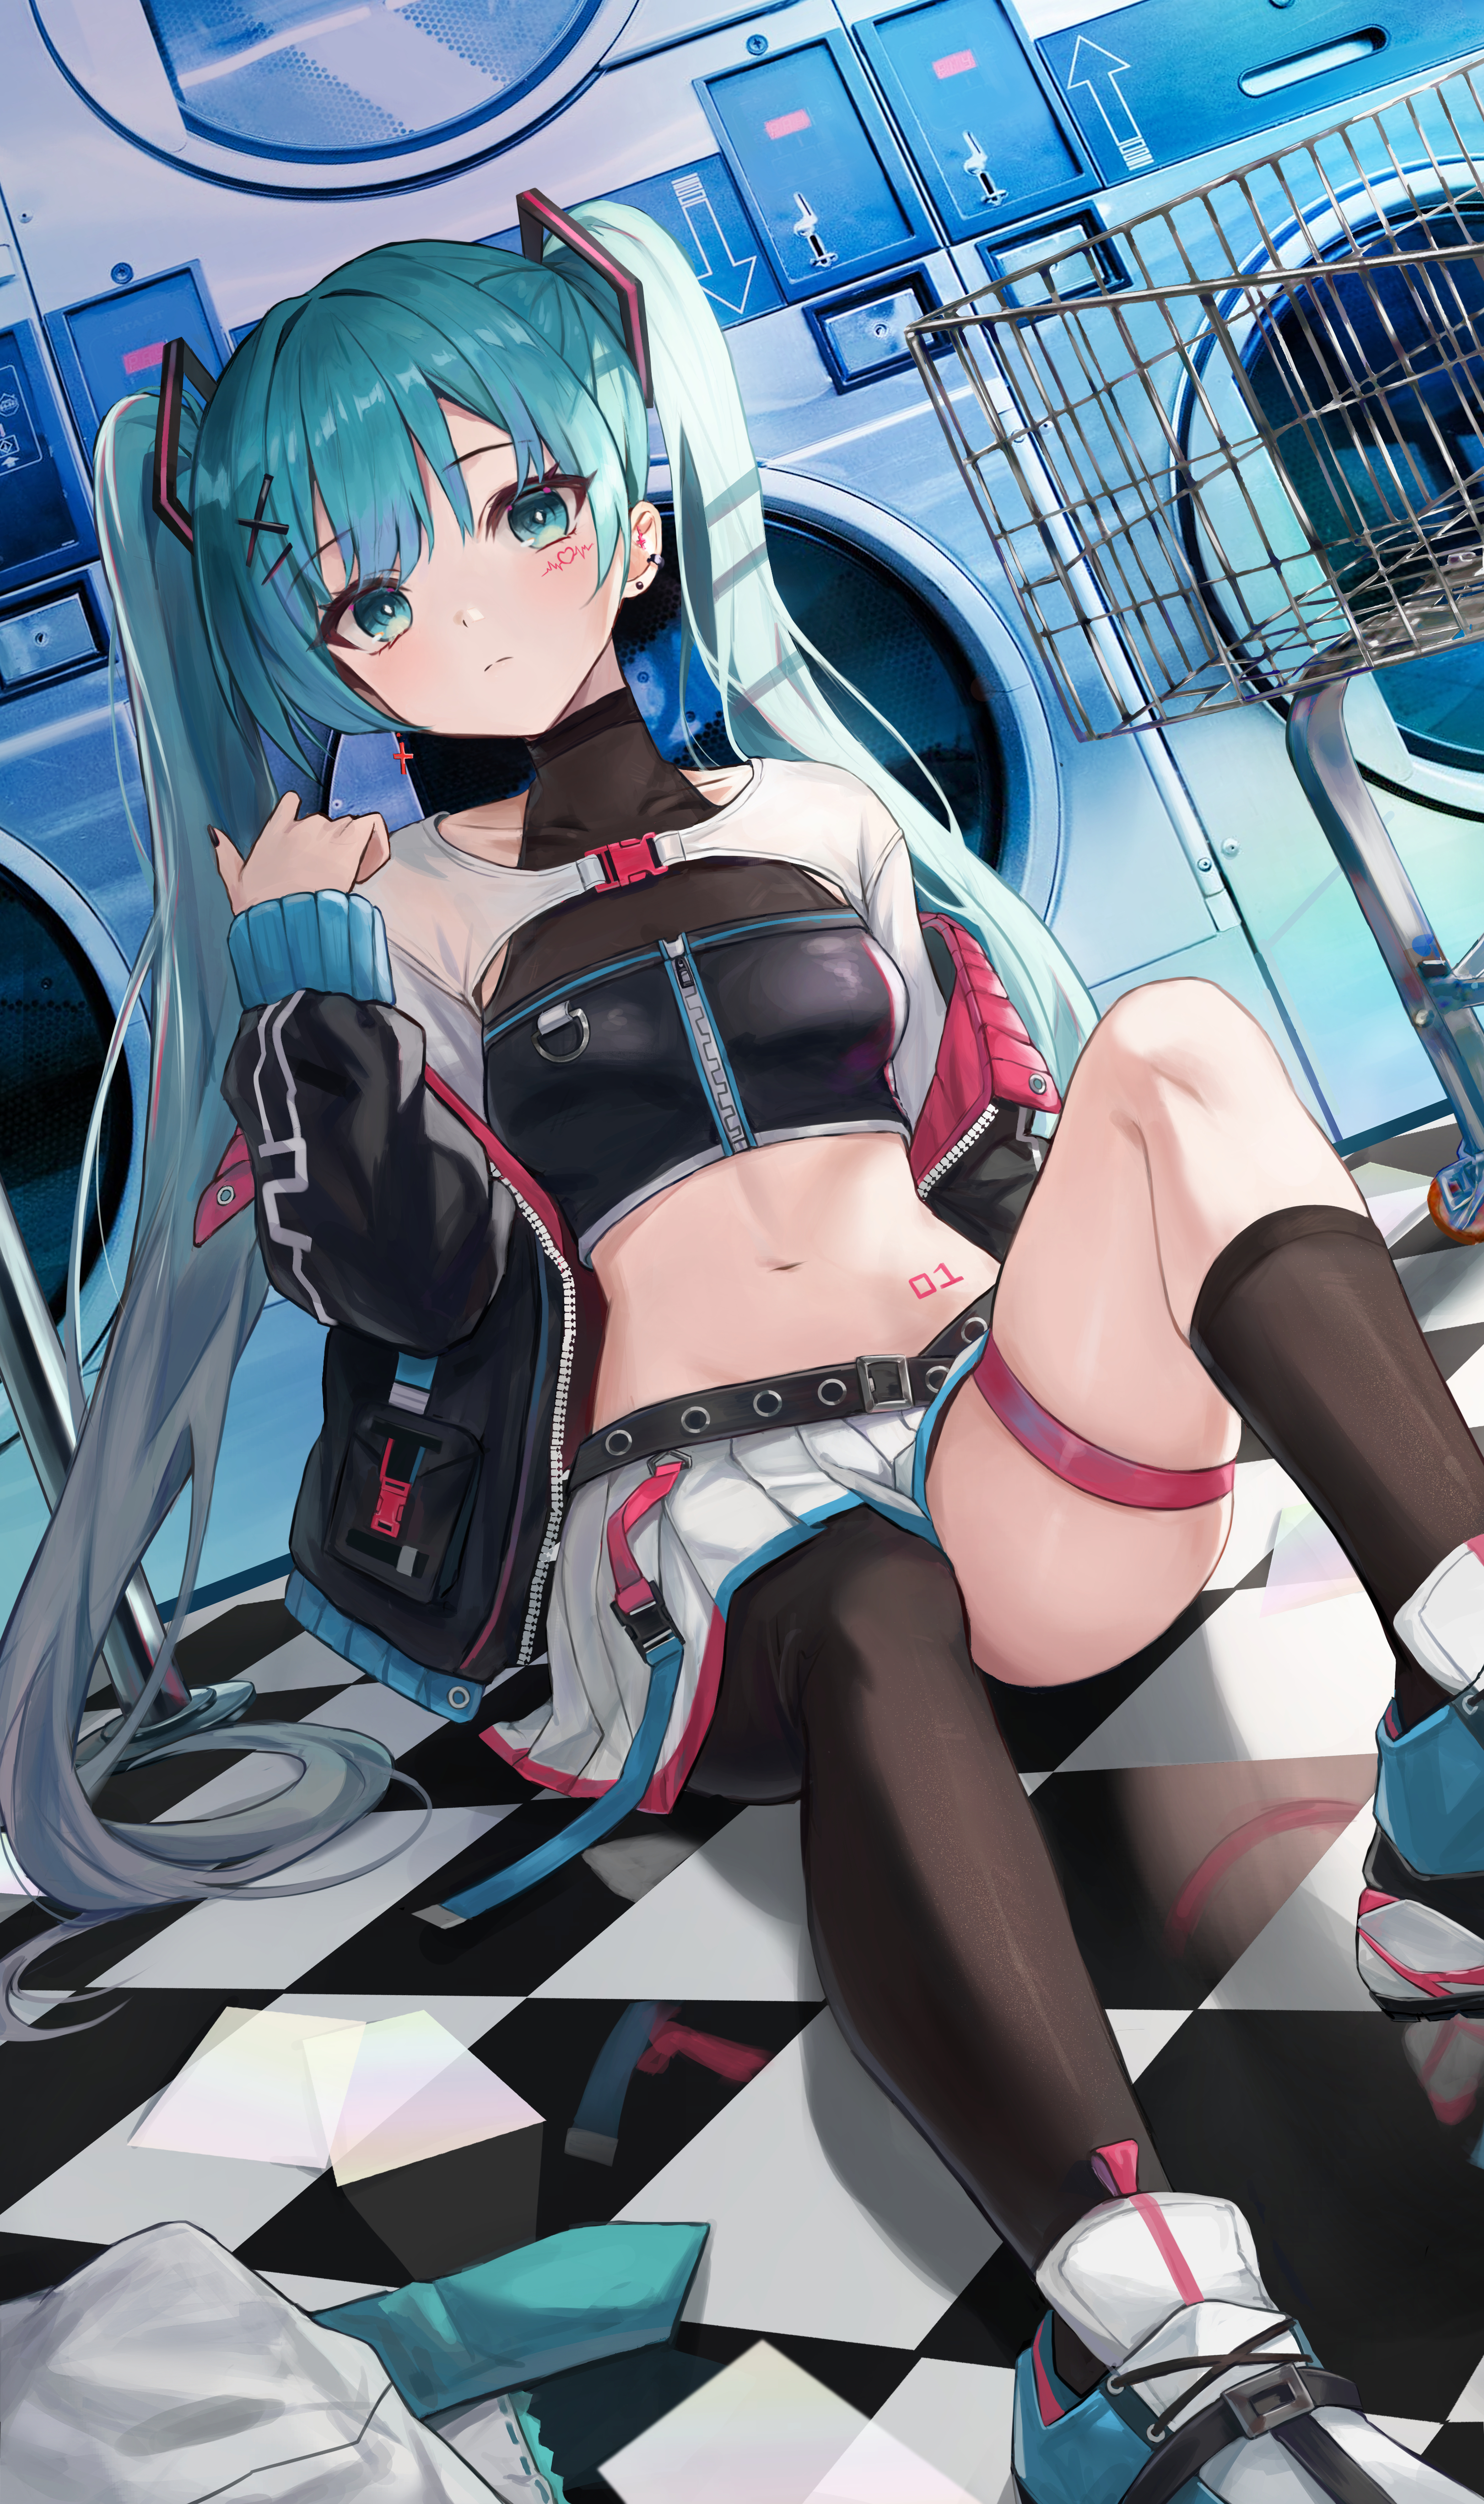 Anime 3243x5472 anime anime girls Hatsune Miku Vocaloid long hair twintails blue hair blue eyes looking at viewer washing machine shopping cart skirt on the floor checkered portrait display